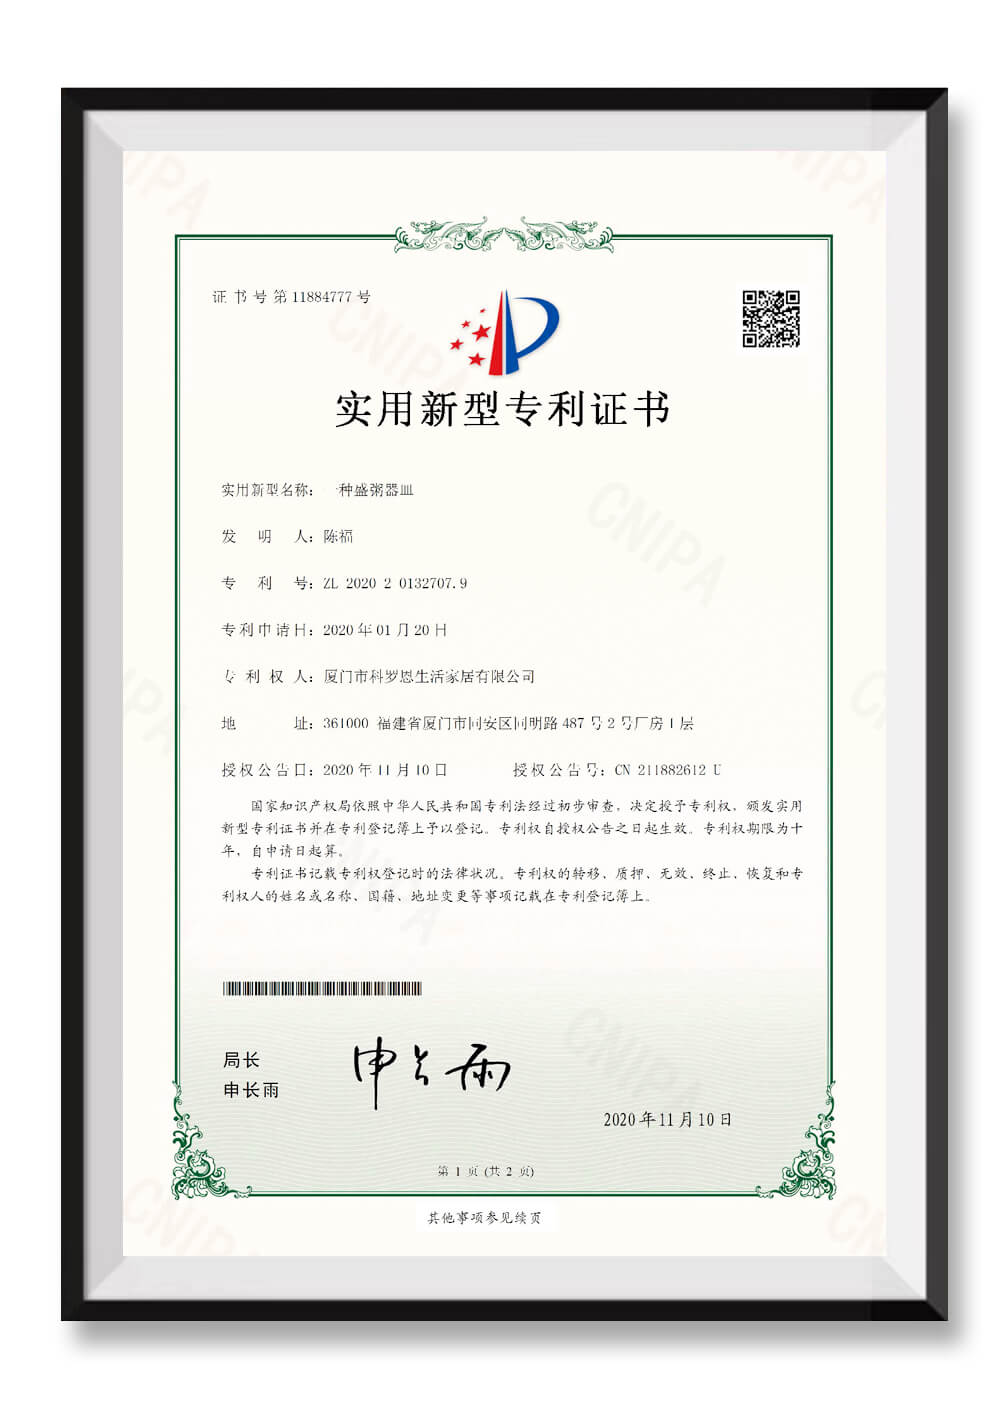 Food container patent certificate